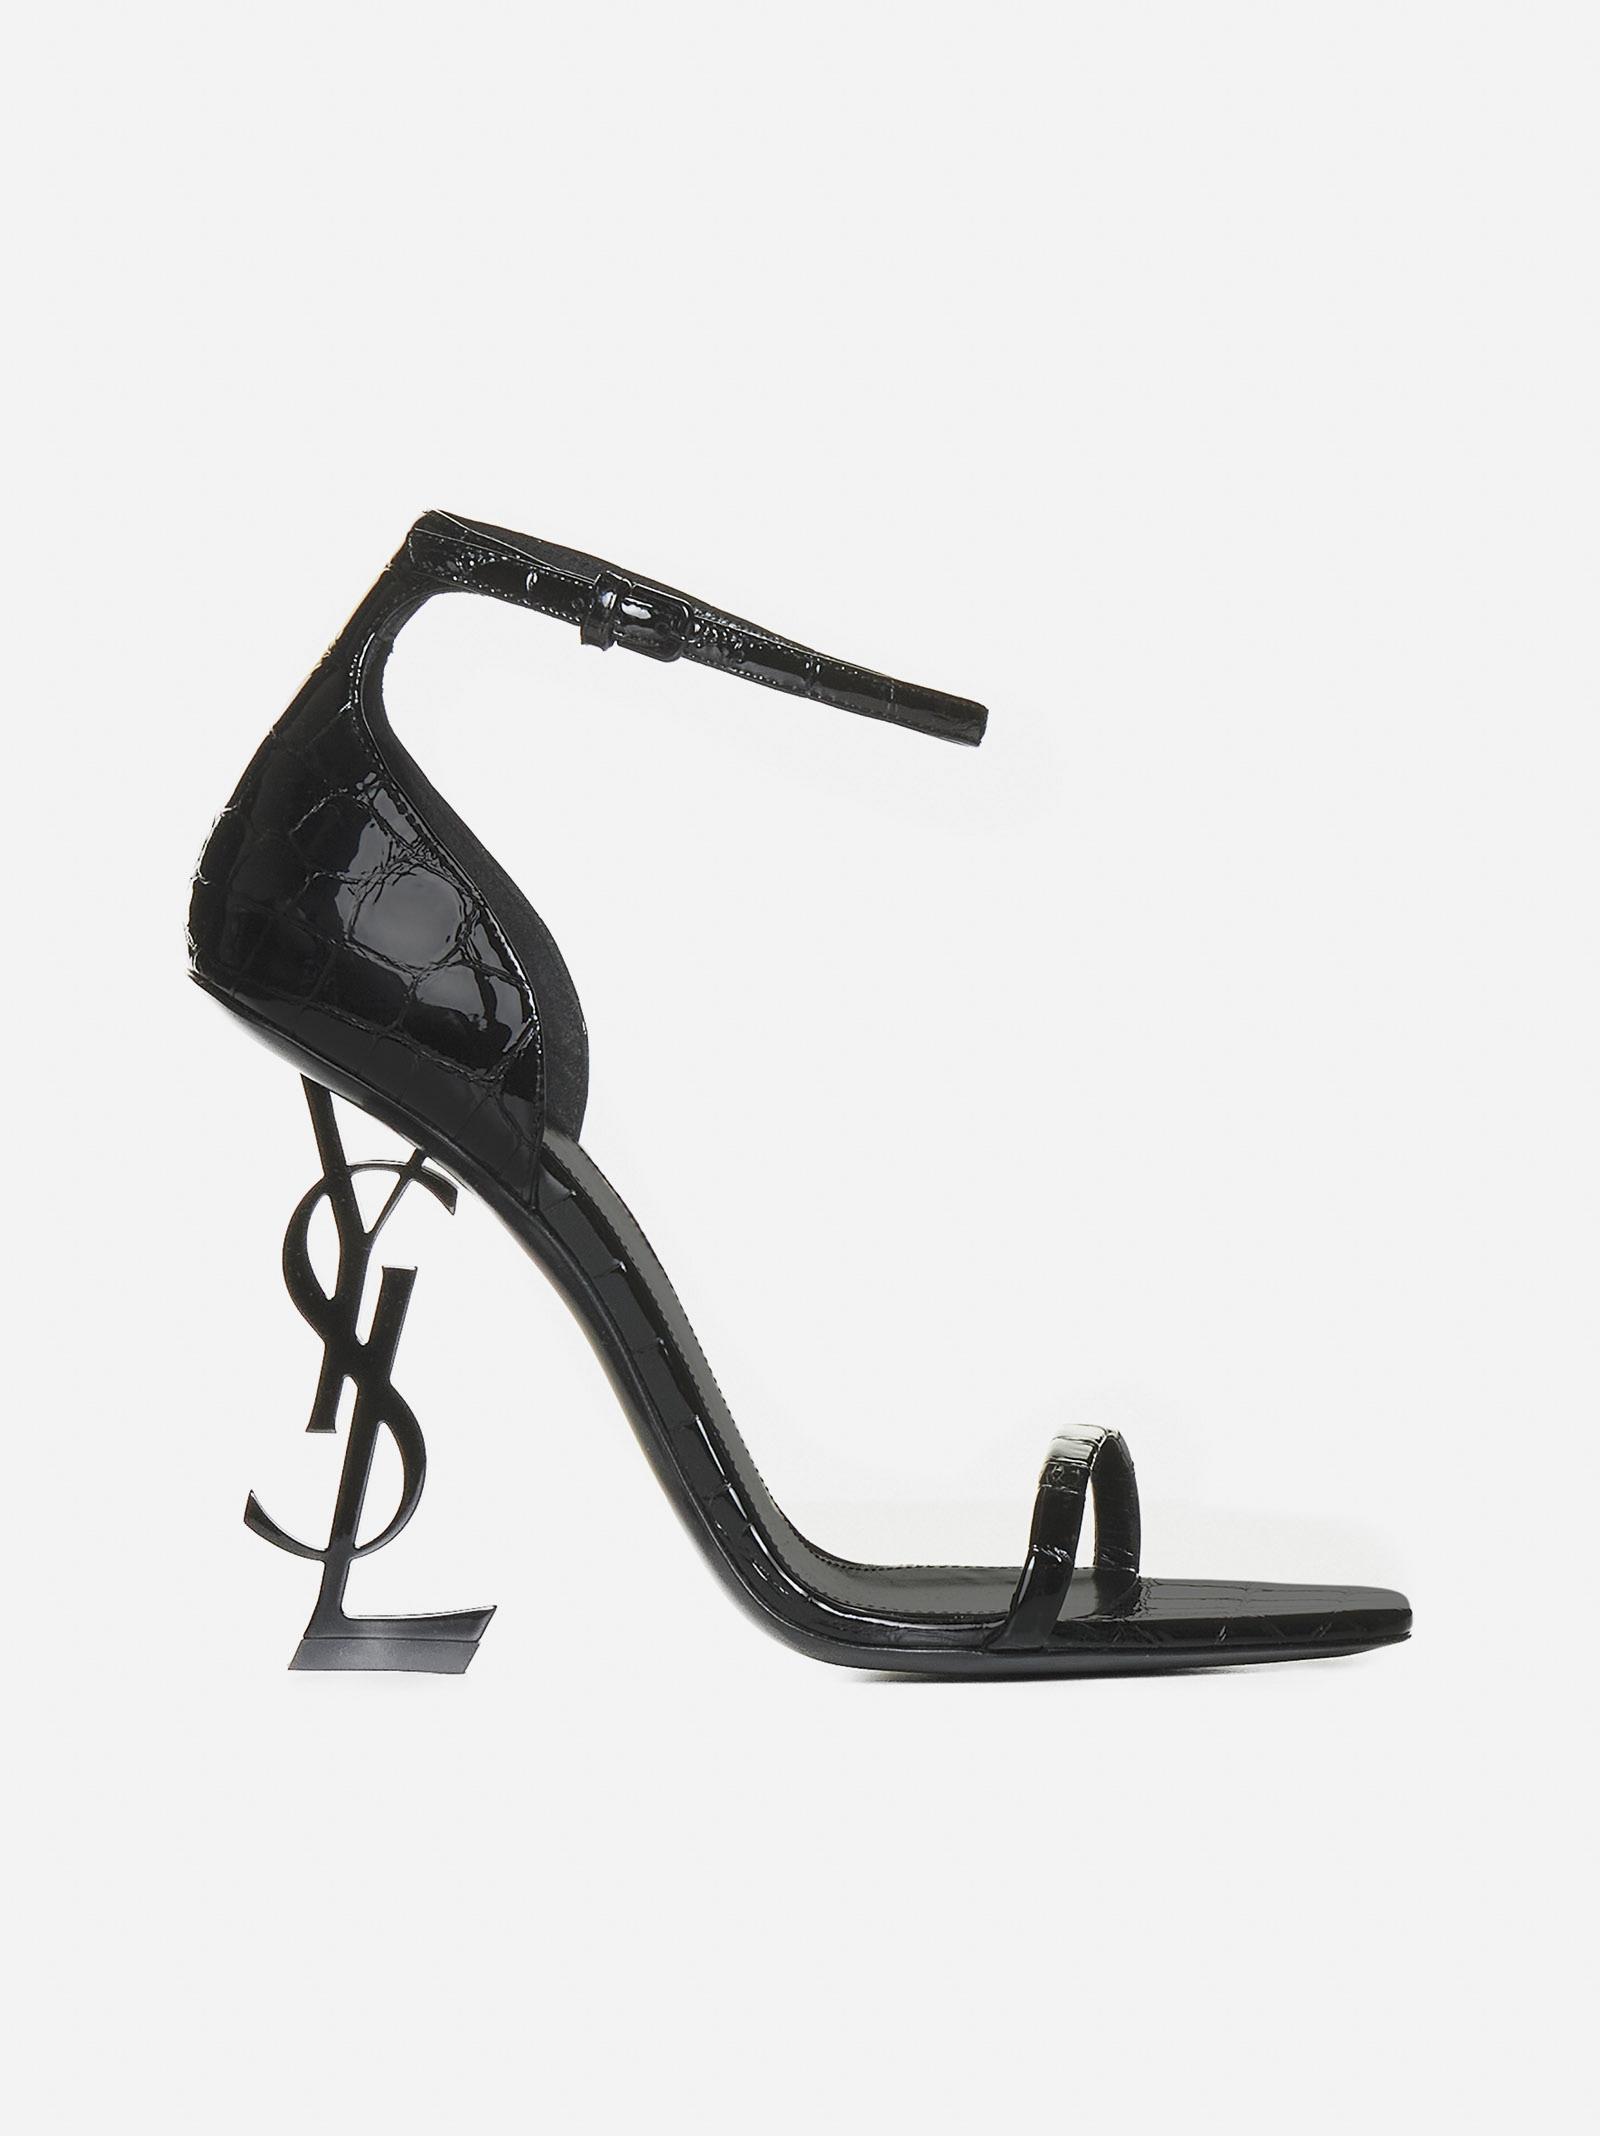 Saint Laurent Ysl Opyum Patent Leather Sandals in White | Lyst